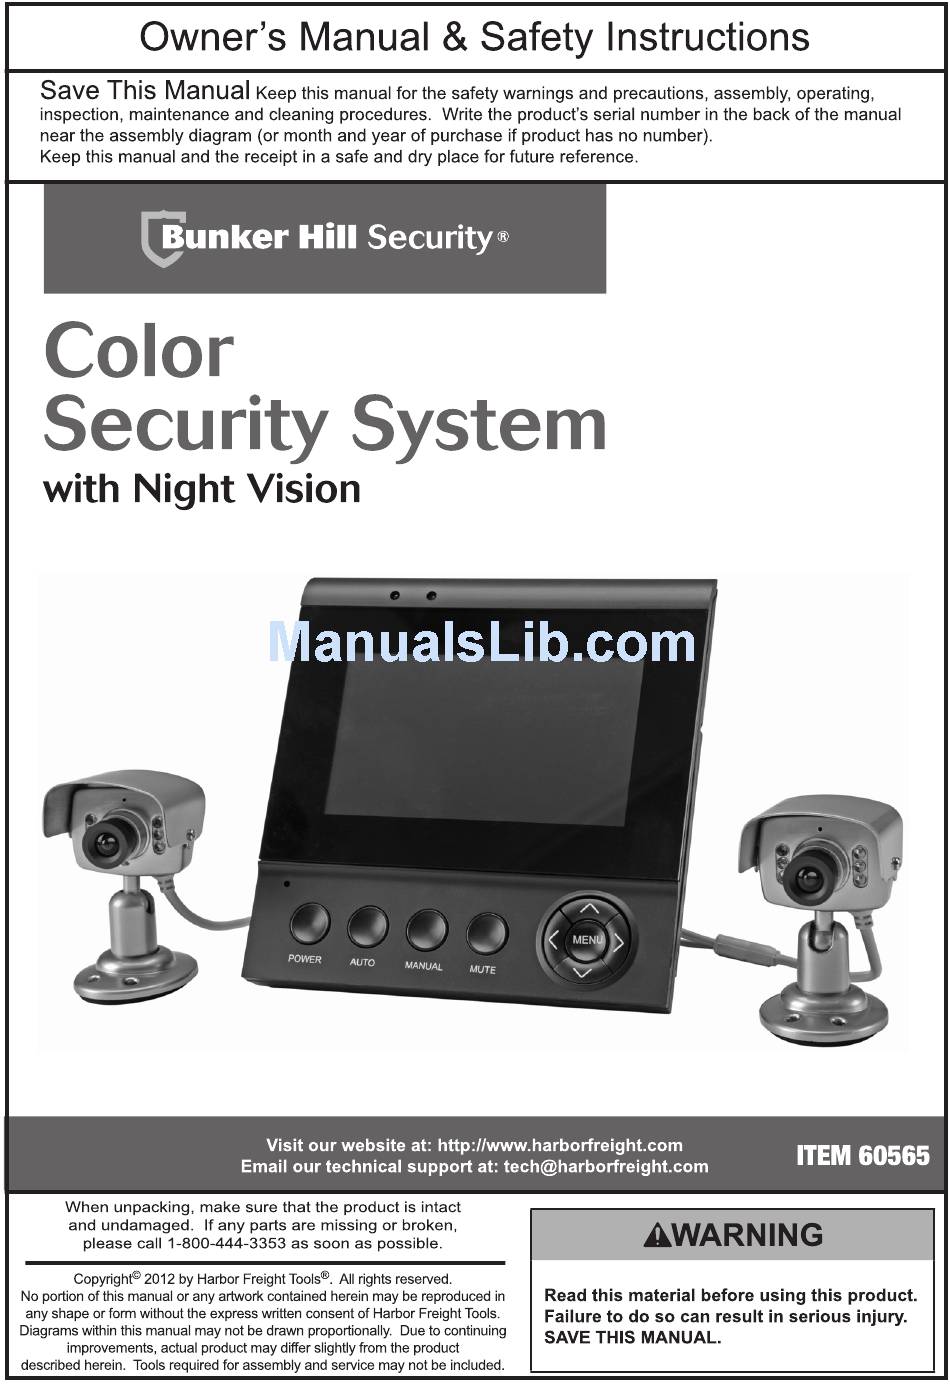 Bunker Hill Security Camera Owners Manual - Collections Photos Camera